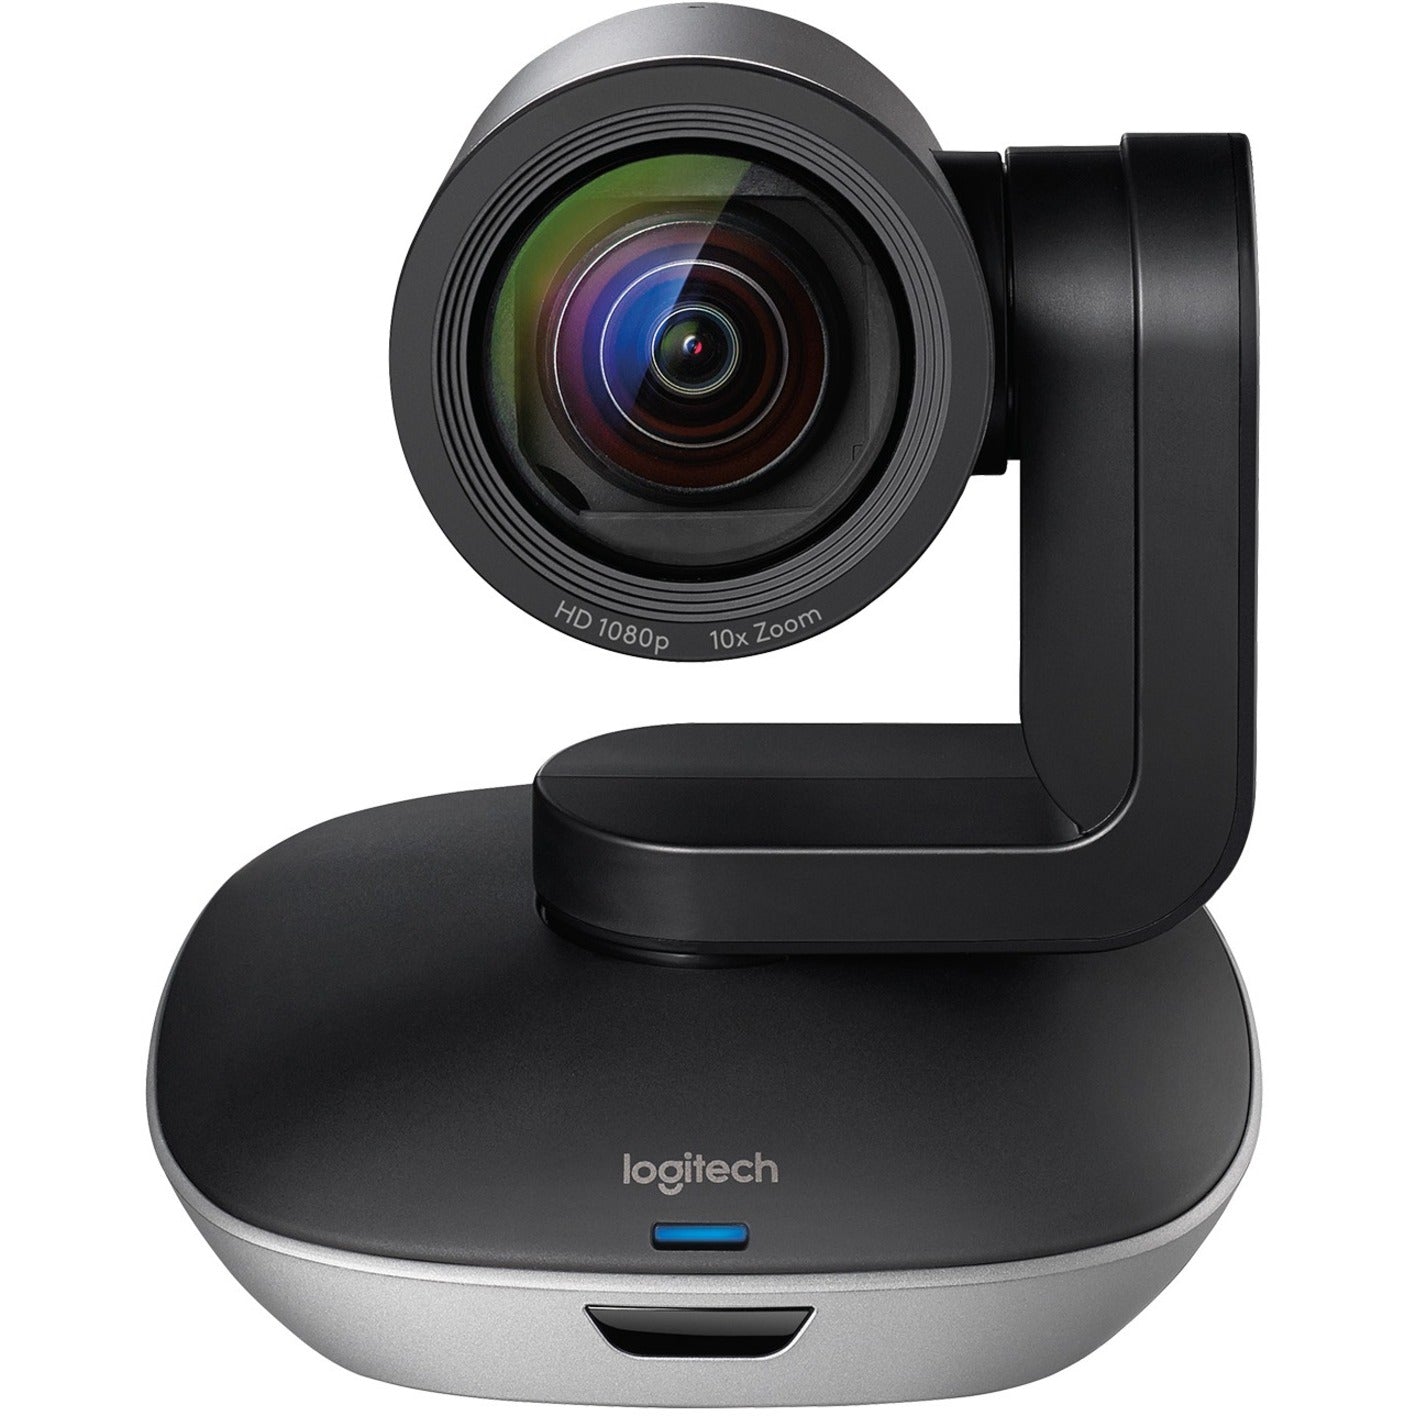 Logitech 960-001060 GROUP Video Conferencing System Plus Expansion Mics, Full HD 1080p, 30fps